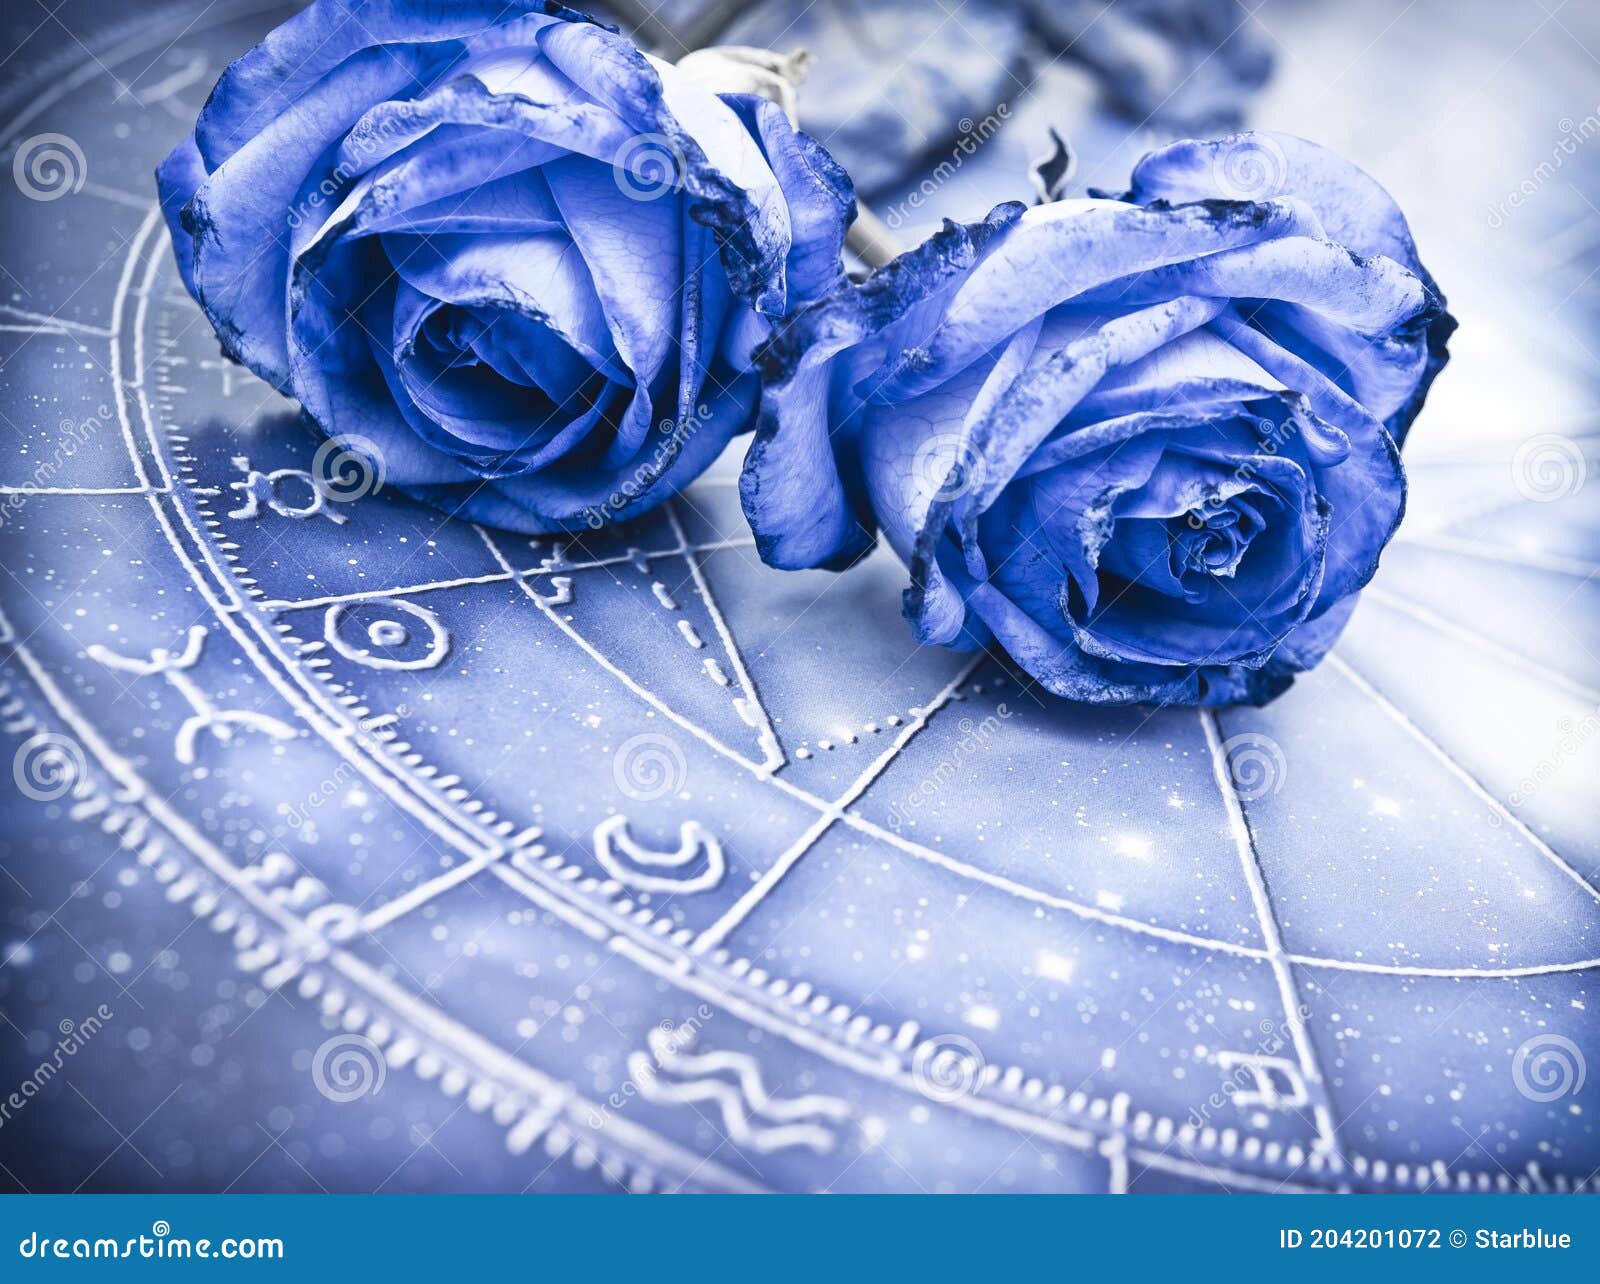 Romantic Horoscope with Beautiful Blue Roses Like Zodiac and Love Concept  Stock Photo - Image of astrological, relationship: 204201072